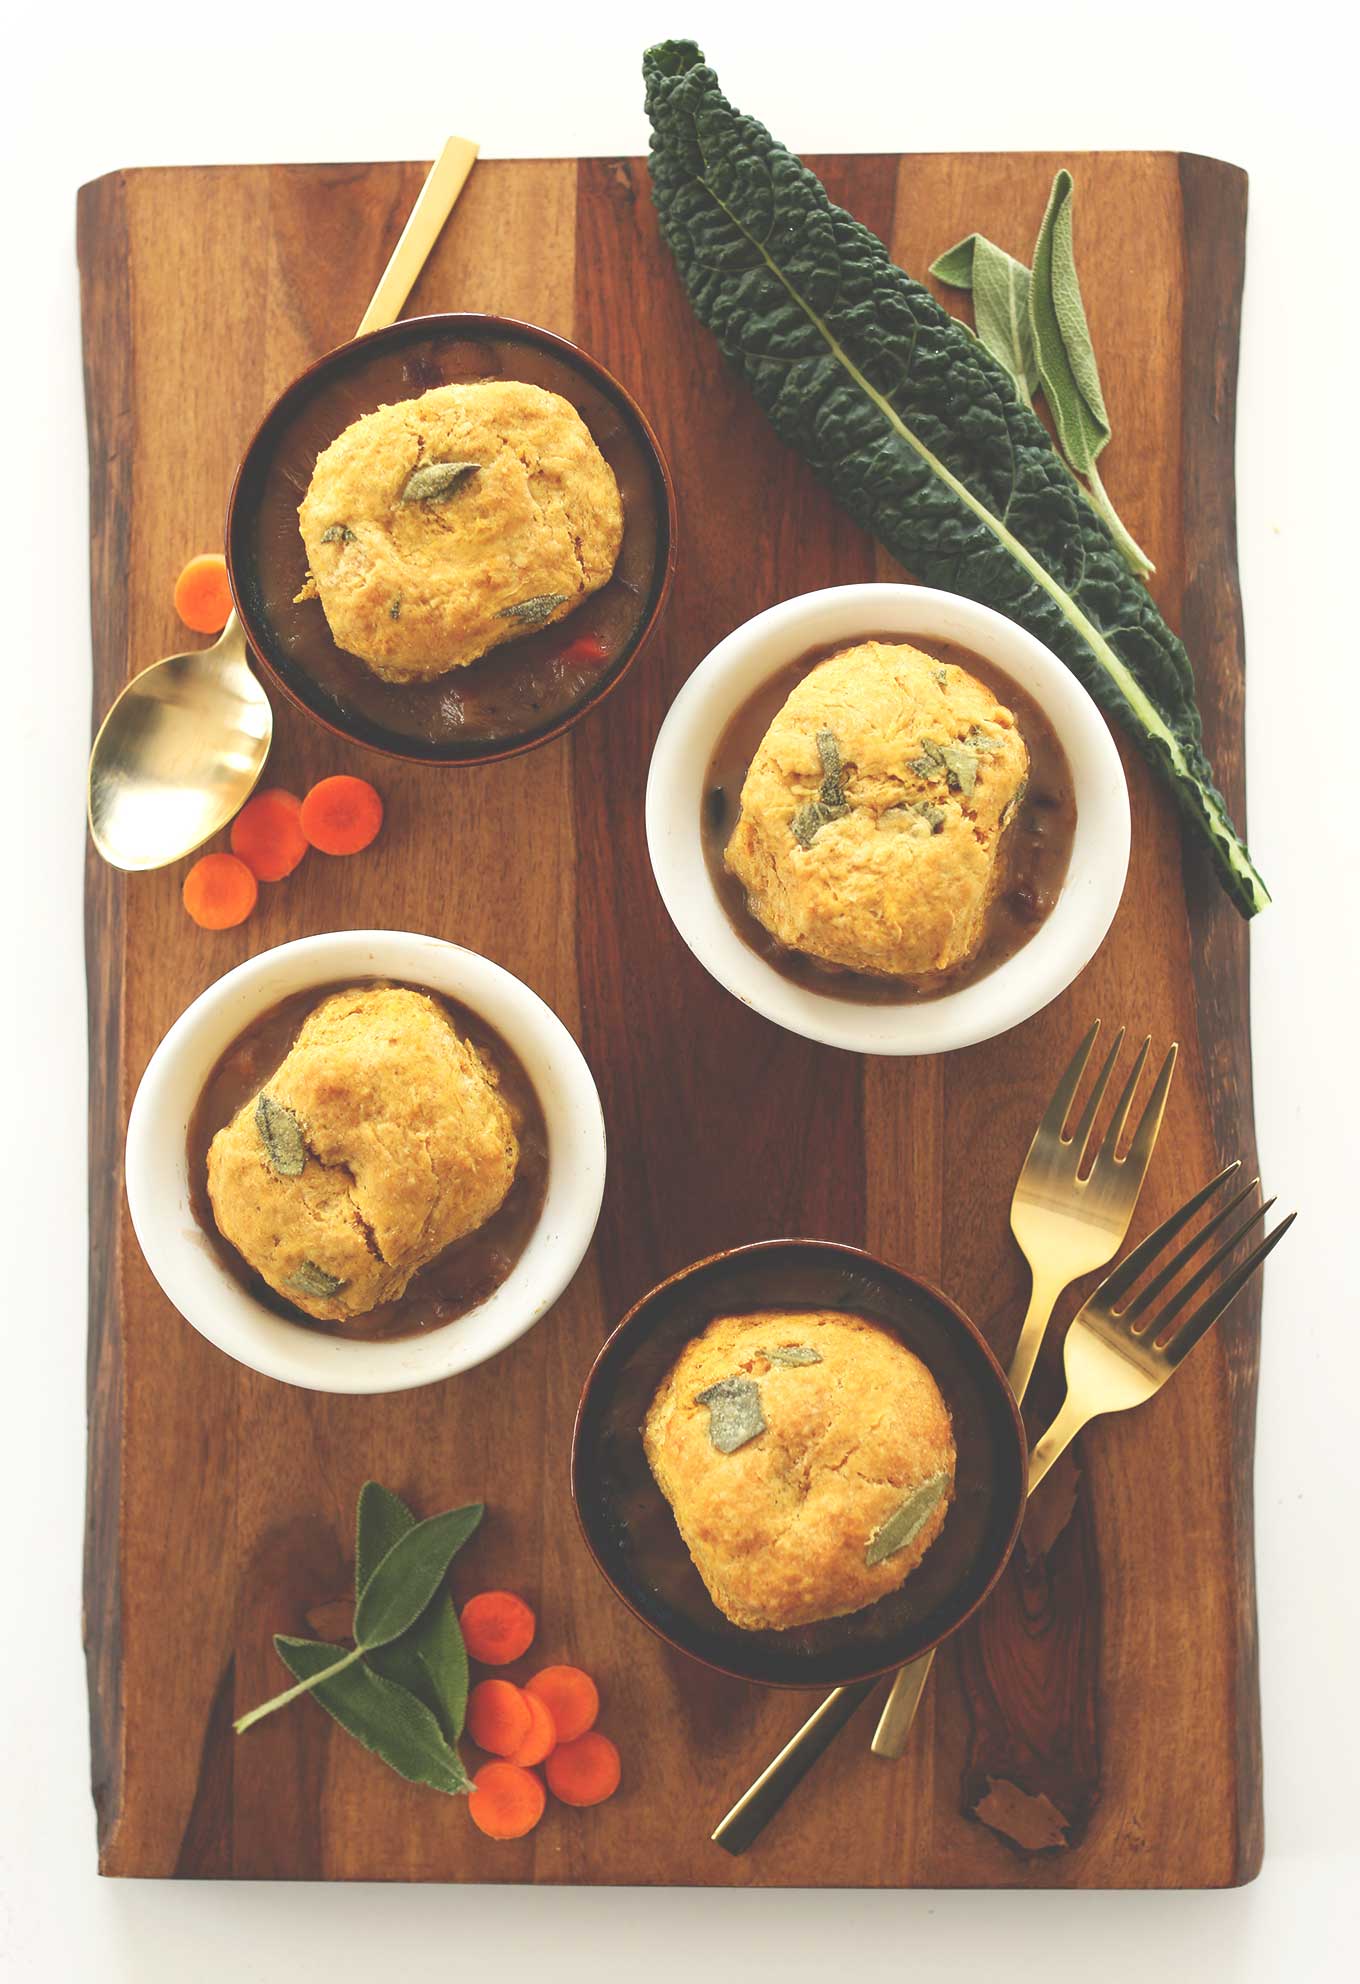 Small bowls of our Vegan Fall Pot Pies topped with Pumpkin Sage Biscuits